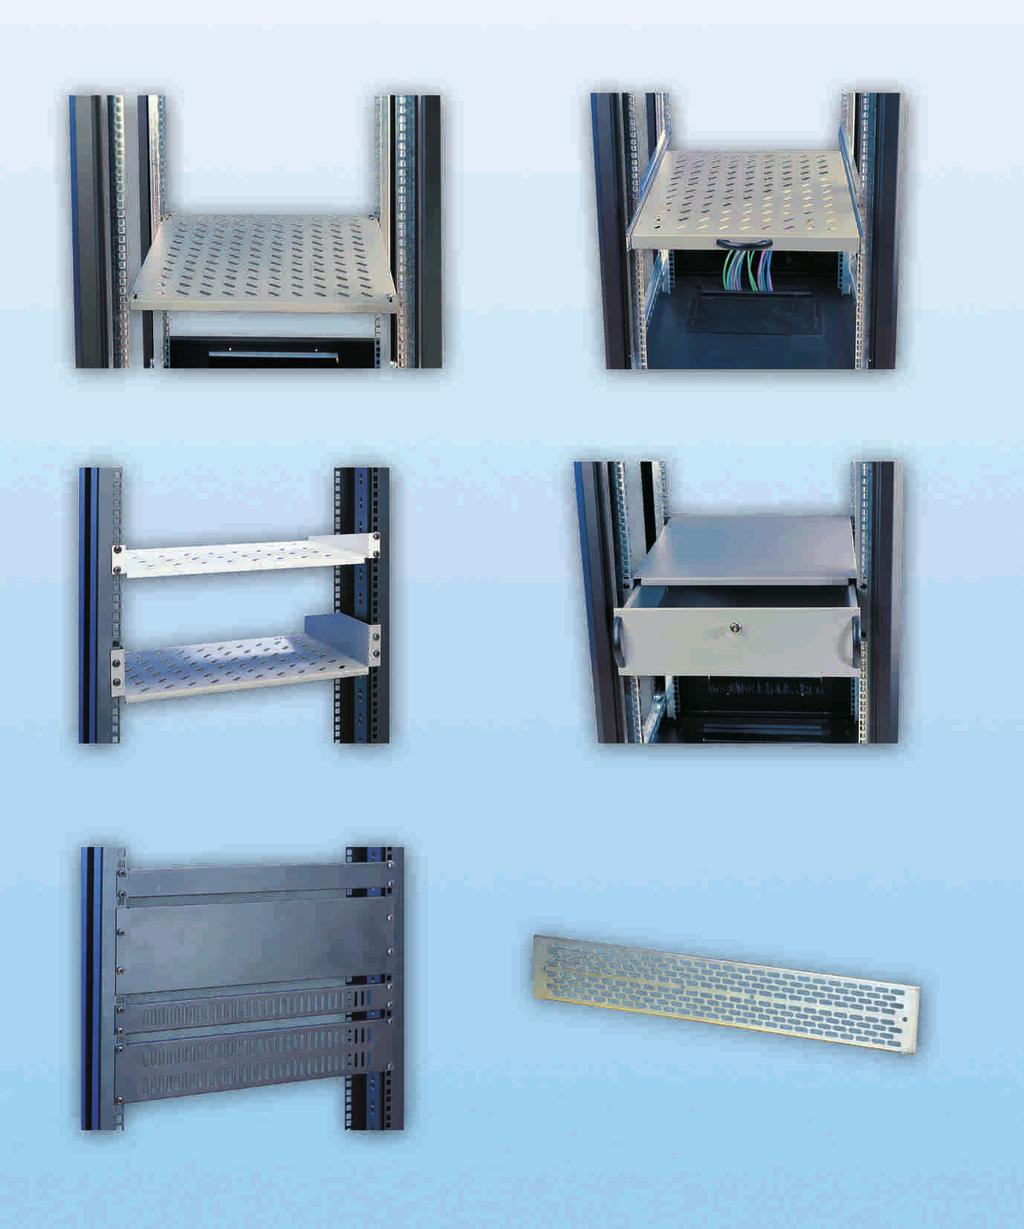 DataLine DataLine Cabinet Accessories Description HCS DataLine series includes a wide range of high quality racks, cabinets and enclosures, specially designed for structured premise cabling in local